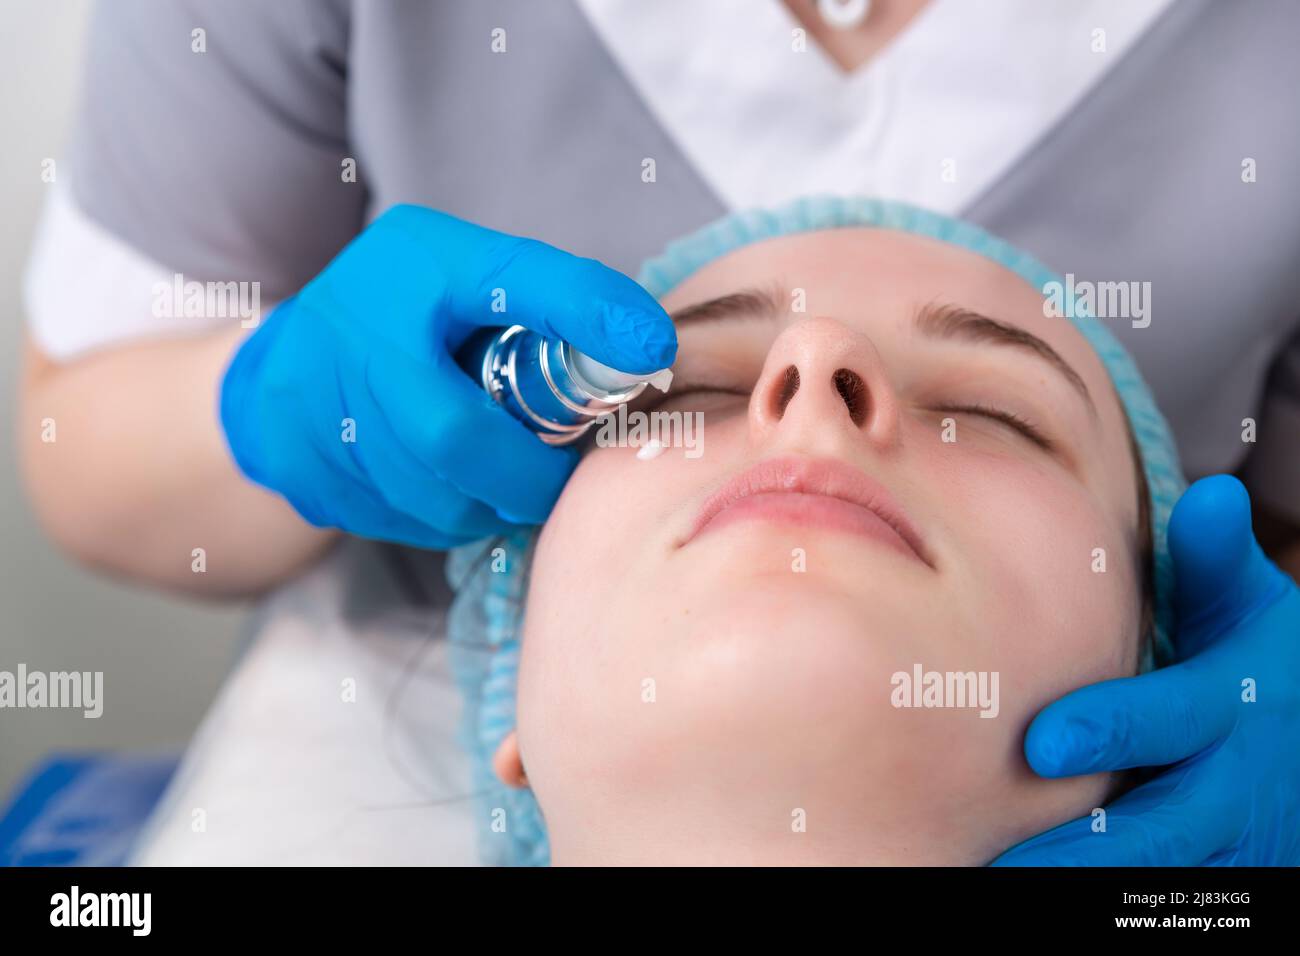 Face skin cream treatment or therapy for tired face skin. Dermatologist applying cream on female face skin. Stock Photo